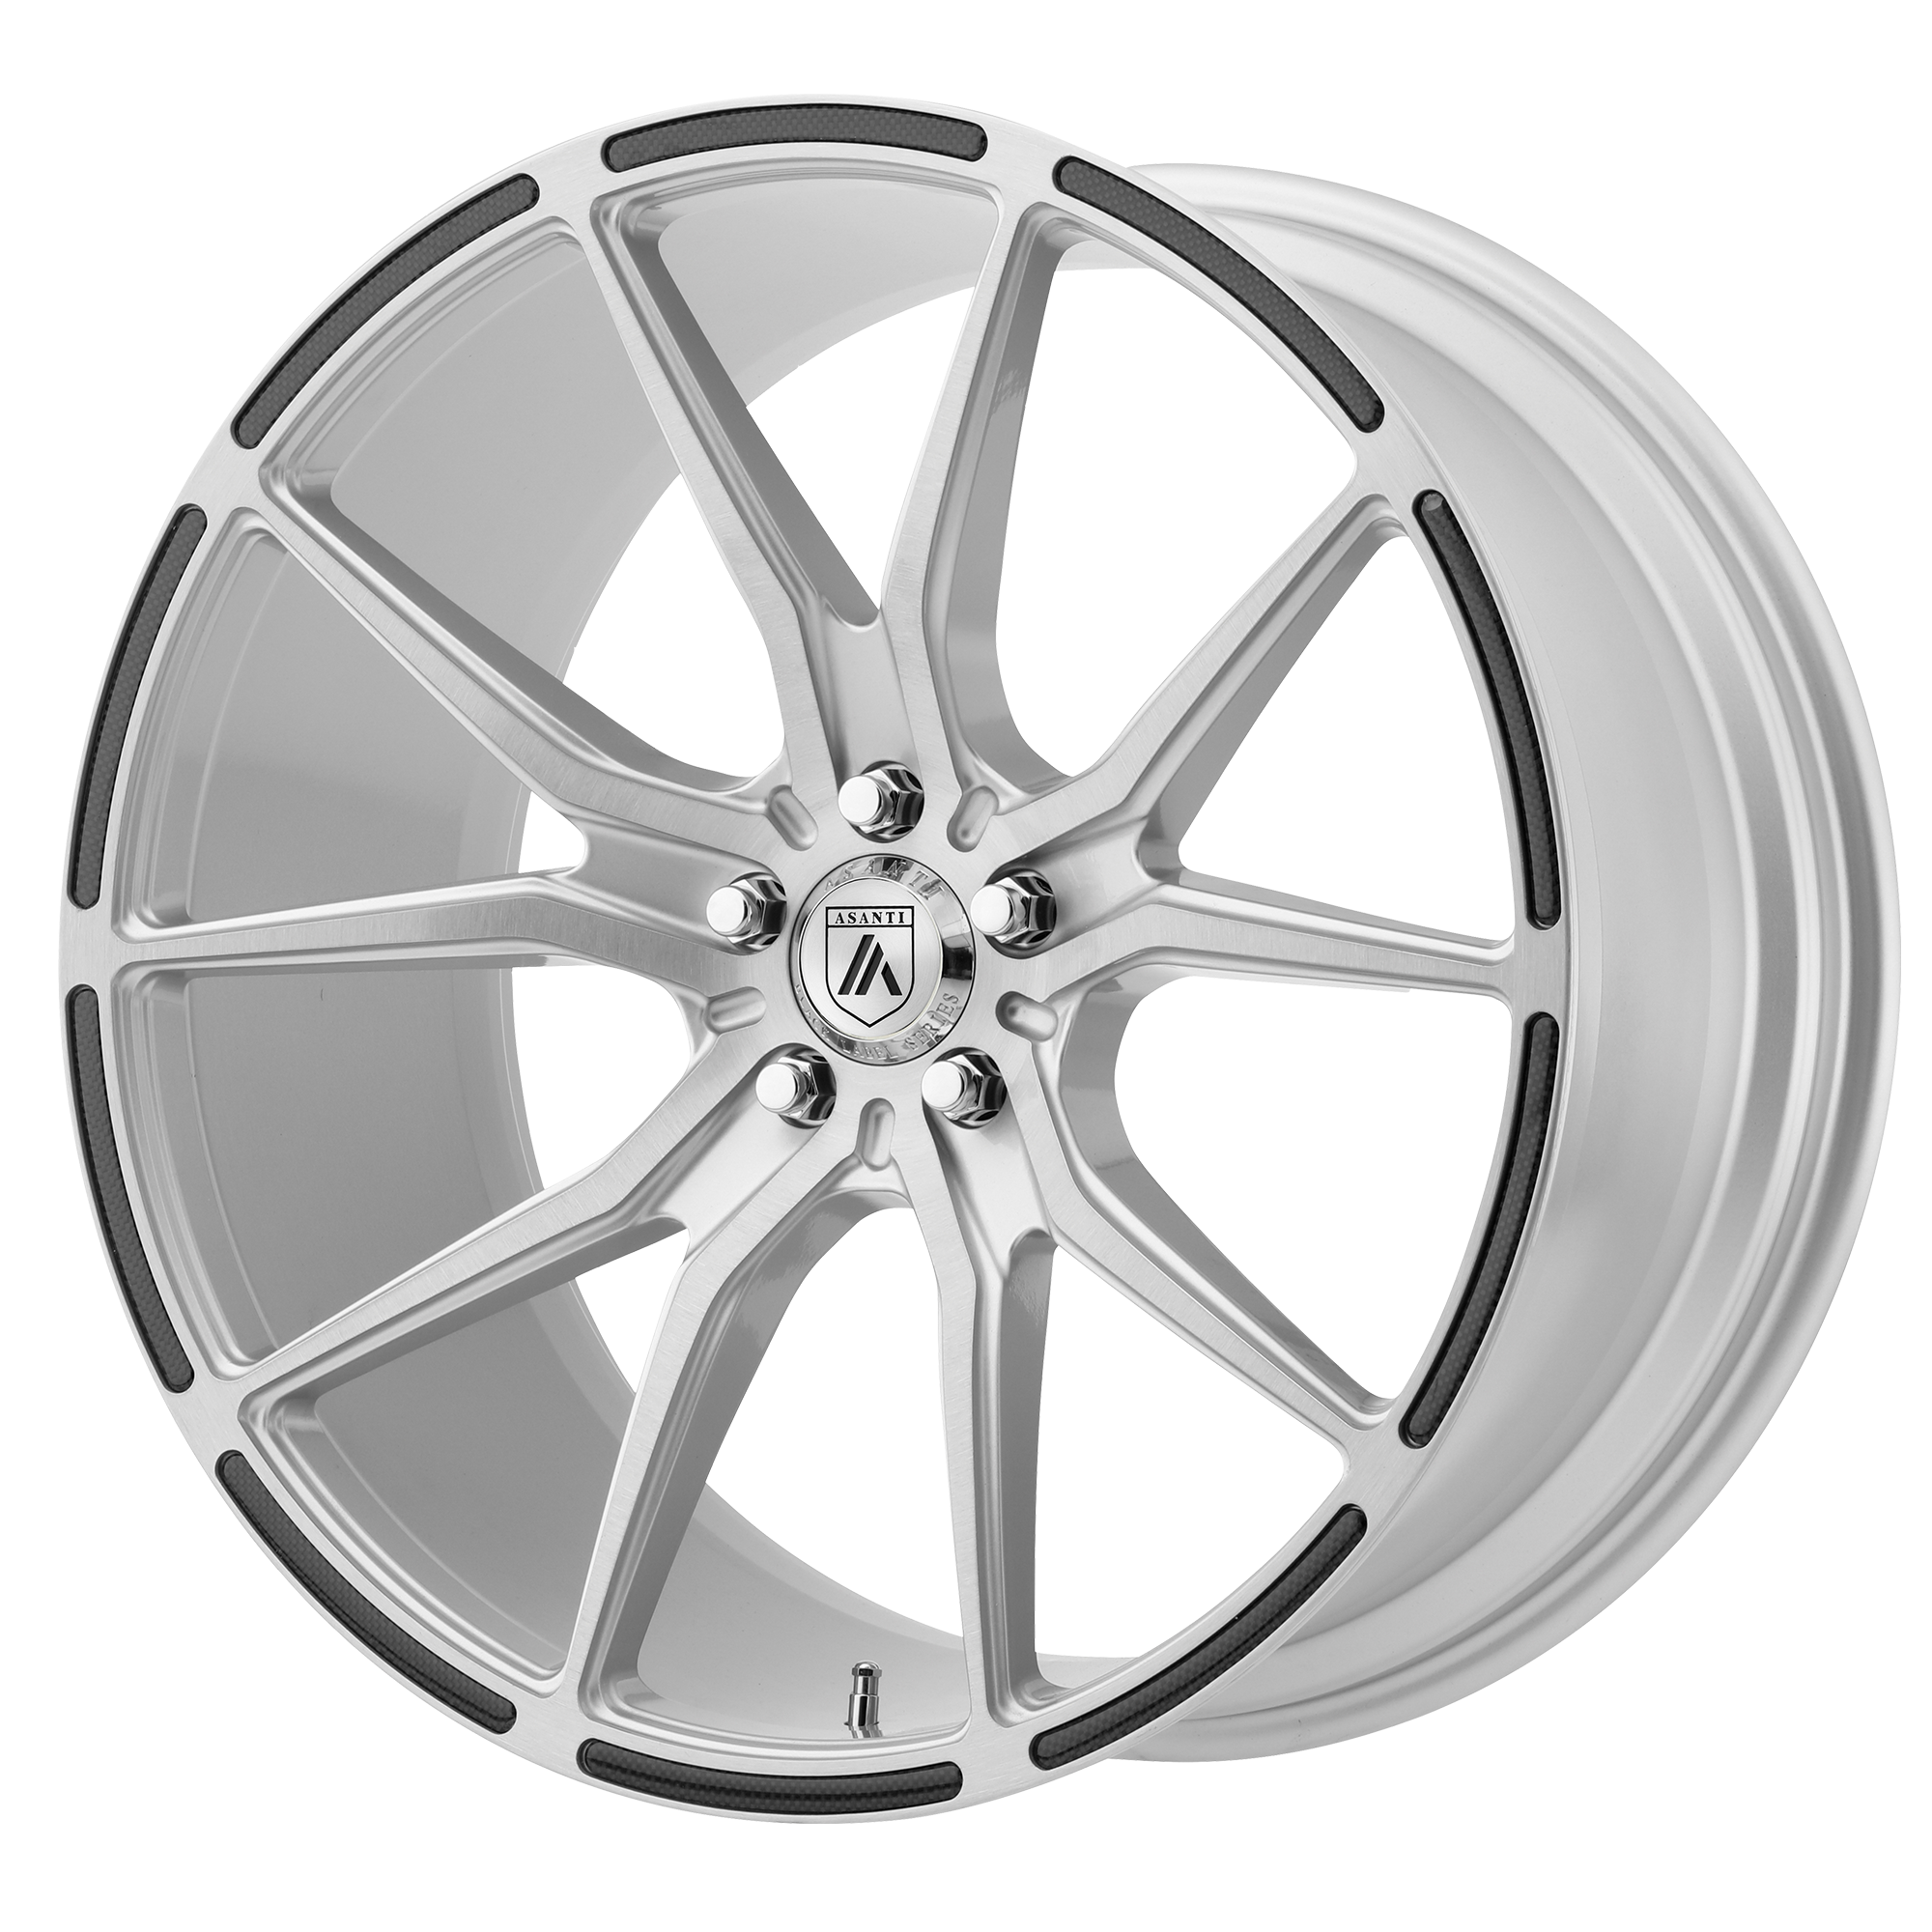 VEGA 20x9 Blank BRUSHED SILVER W/ CARBON FIBER INSERTS (35.00 - 45.00 mm) - Tires and Engine Performance